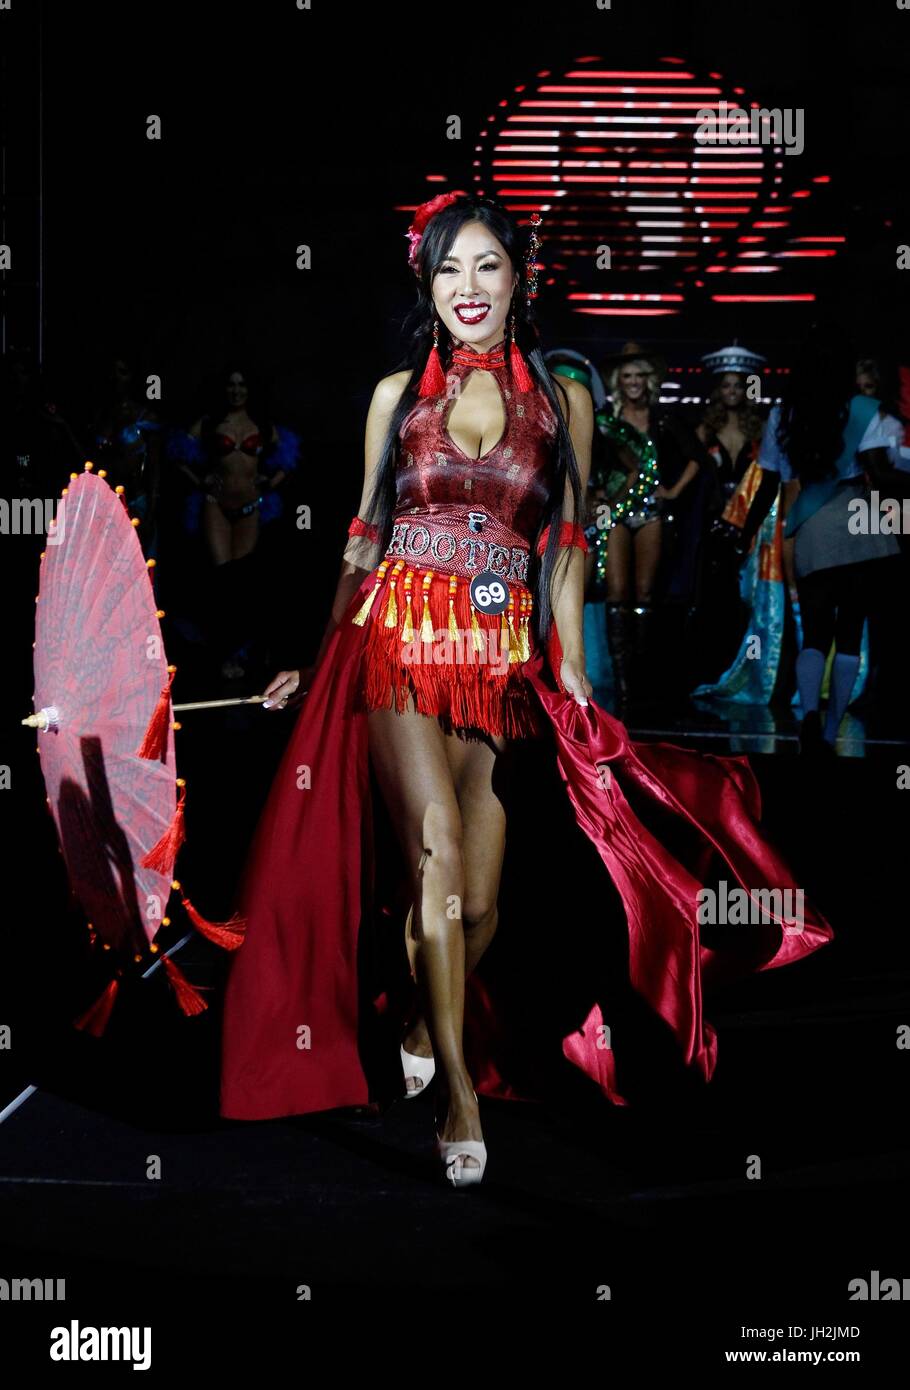 Las Vegas, NV, USA. 11th July, 2017. Aki Li, Miss Hooters of Shanghai, China in attendance for 2017 Hooters International Swimsuit Pageant Preview, Palms Casino Resort, Las Vegas, NV July 11, 2017. Credit: JA/Everett Collection/Alamy Live News Stock Photo